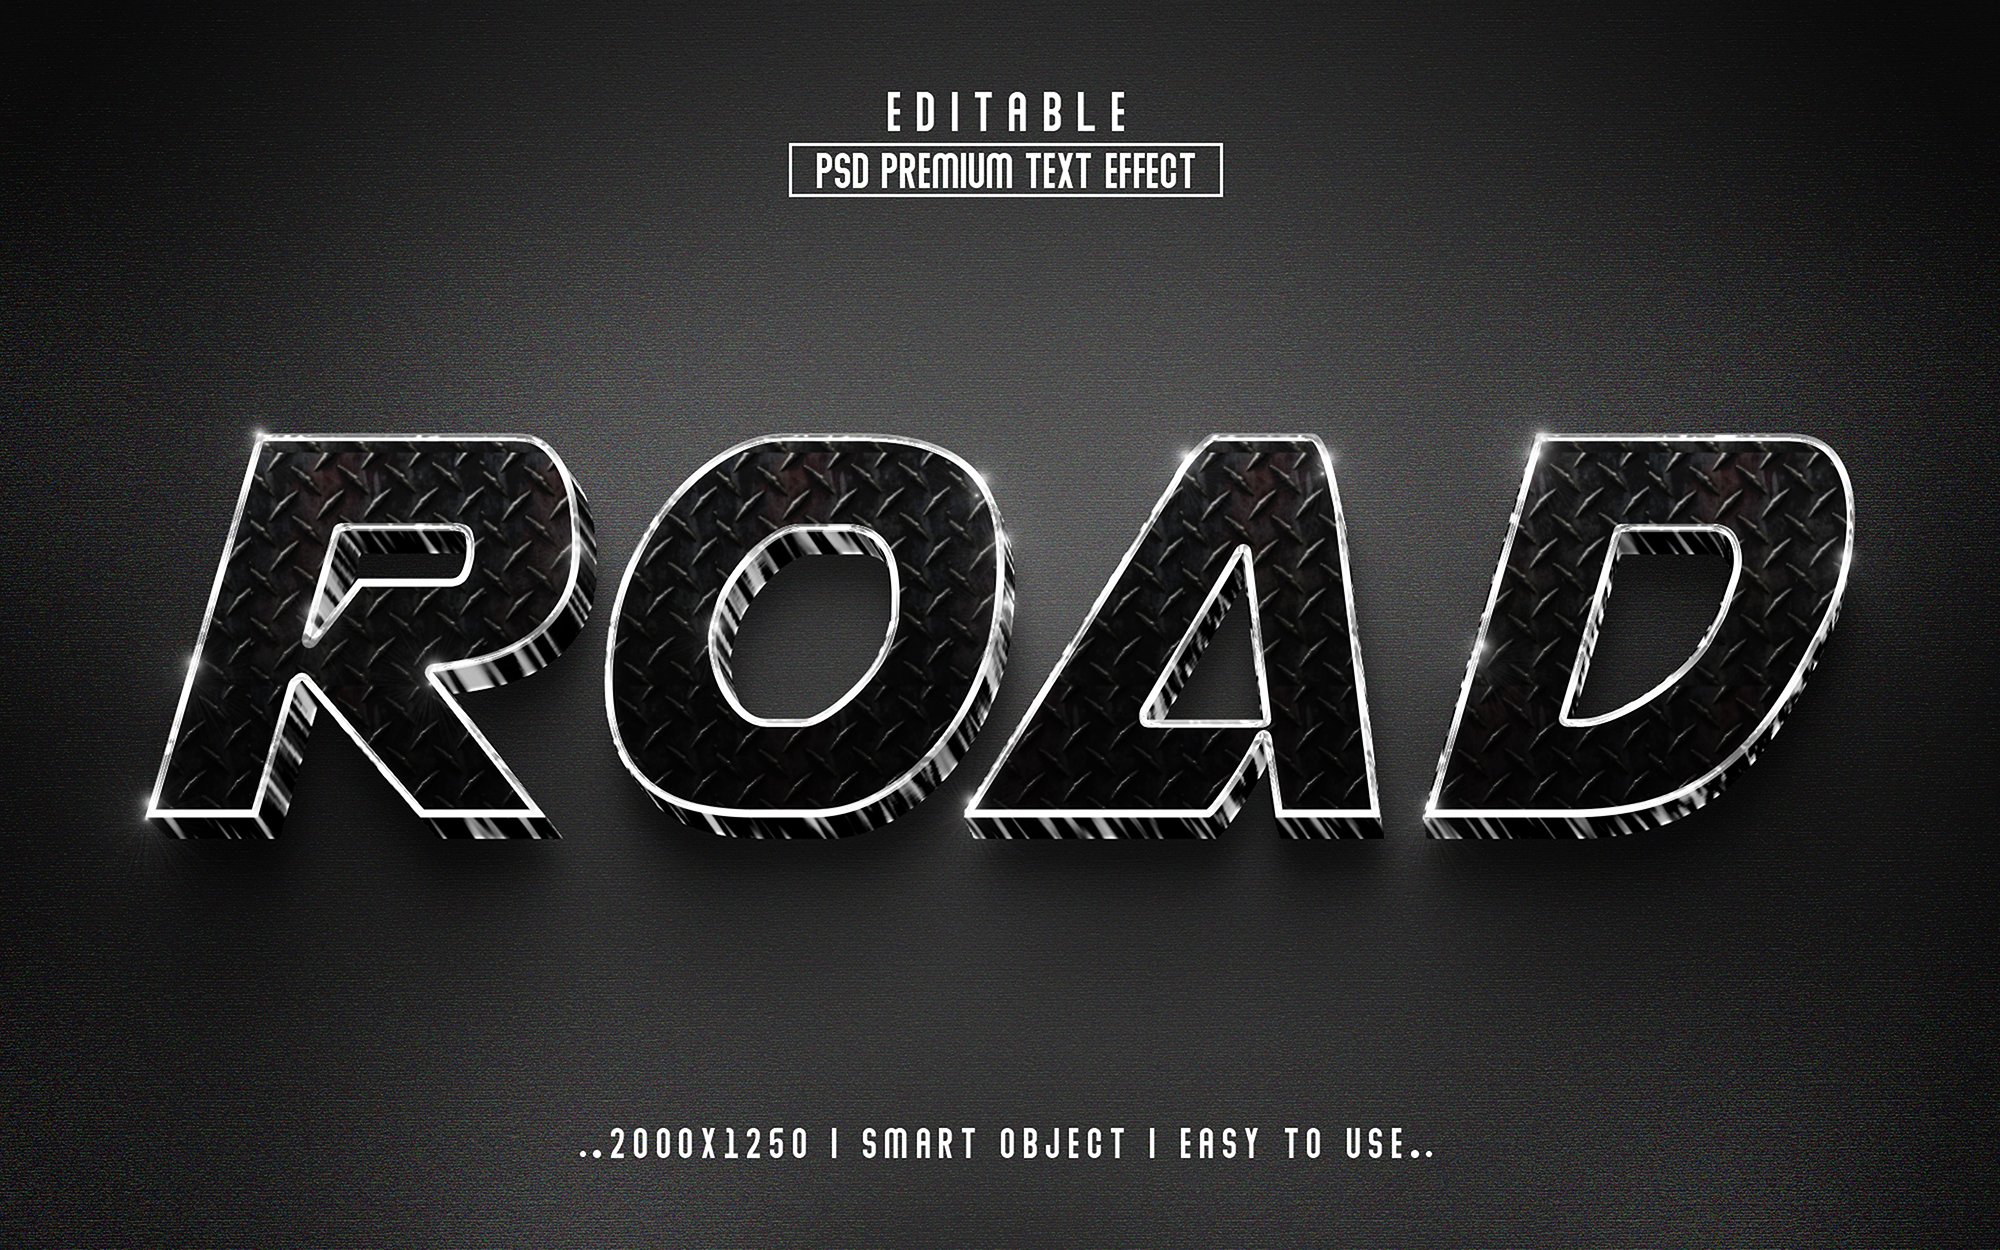 Road 3D Editable Text Effect stylecover image.